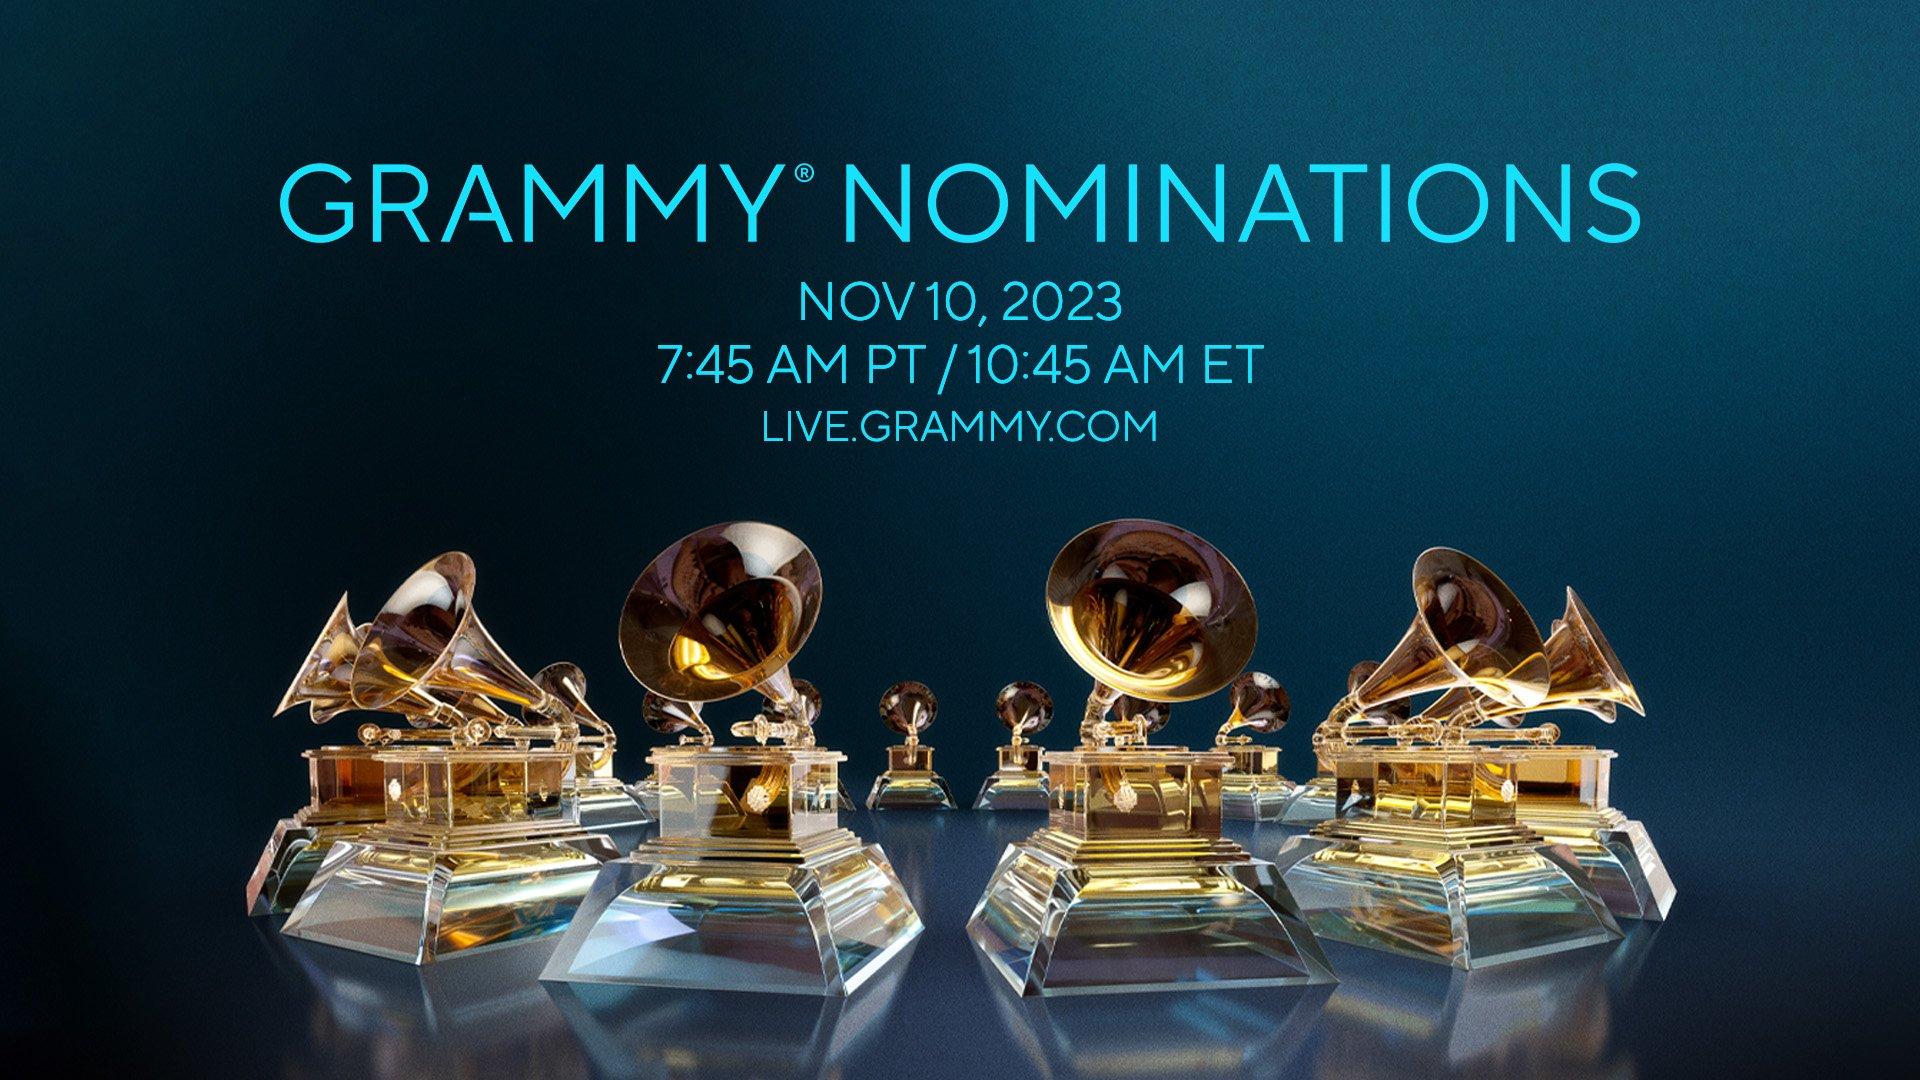 Nominations for the 2024 GRAMMYs will be announced Friday, Nov. 10